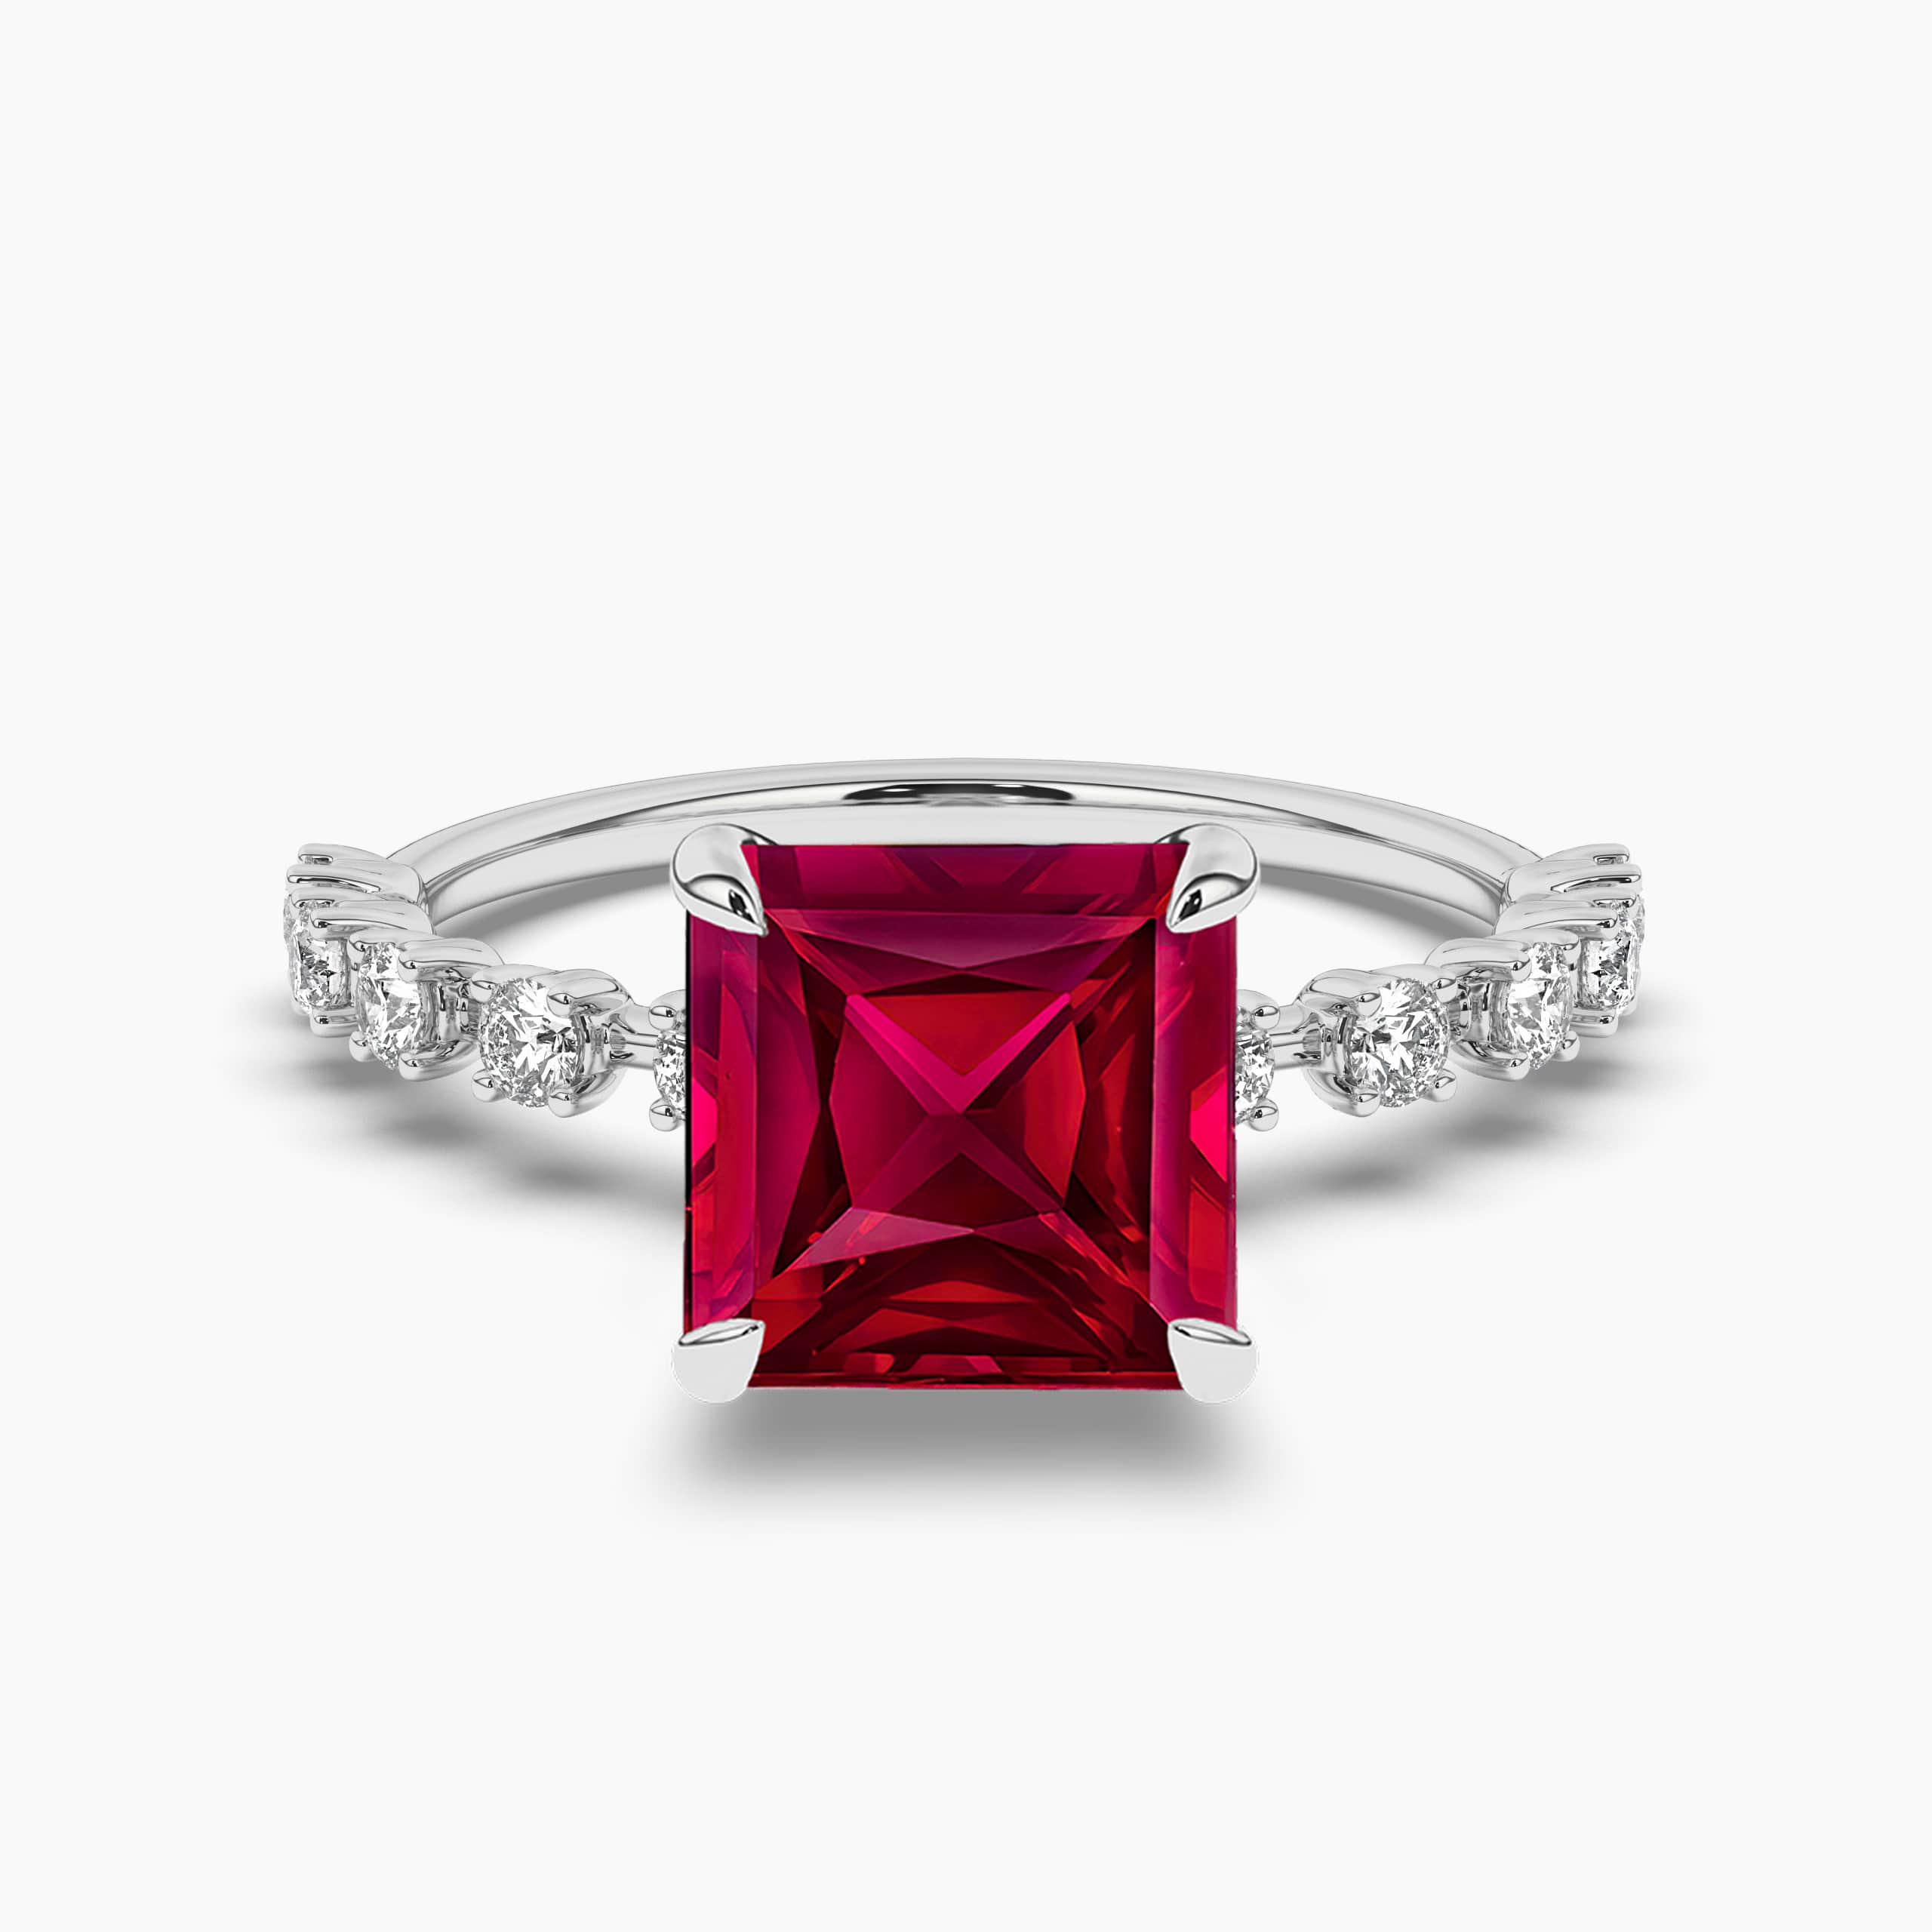 WHITE GOLD PRIN DIAMOND AND RUBY PRINCESS CUT CHANNEL RING